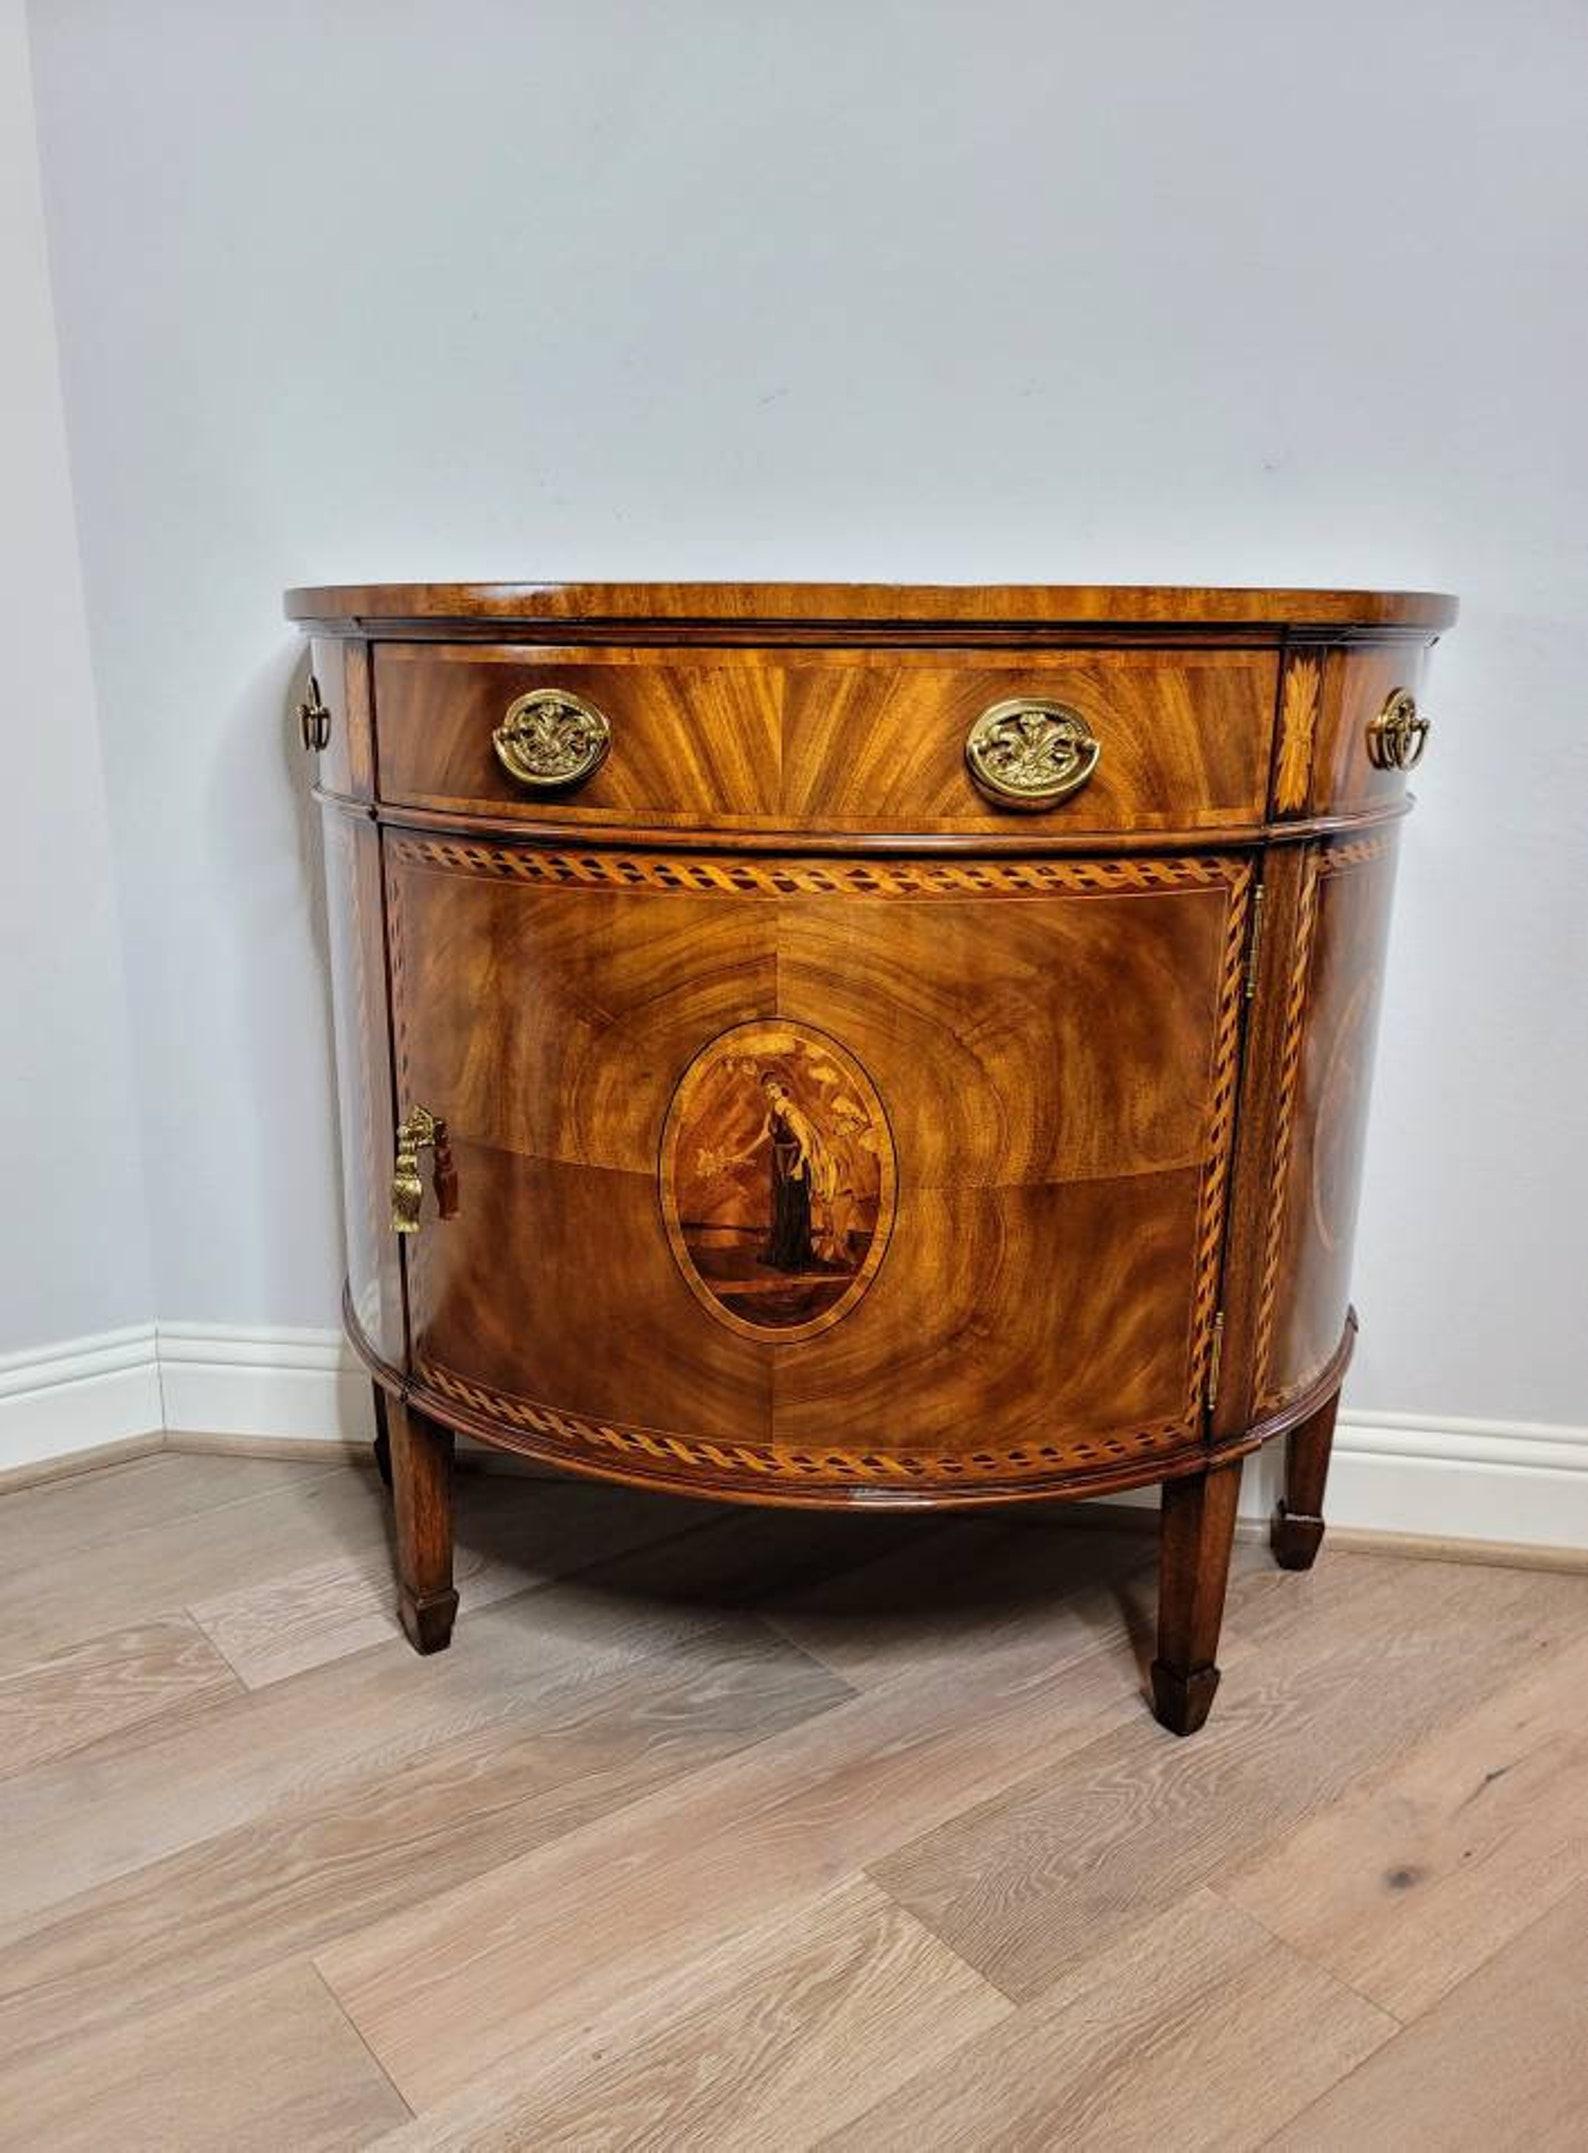 A richly decorated bow front chest by very fine quality American designer Maitland-Smith. Handcrafted in luxurious Louis XVI taste. 

Visually striking flame mahogany panels, exquisite marquetry-work, with a cross-banded highly figured top and